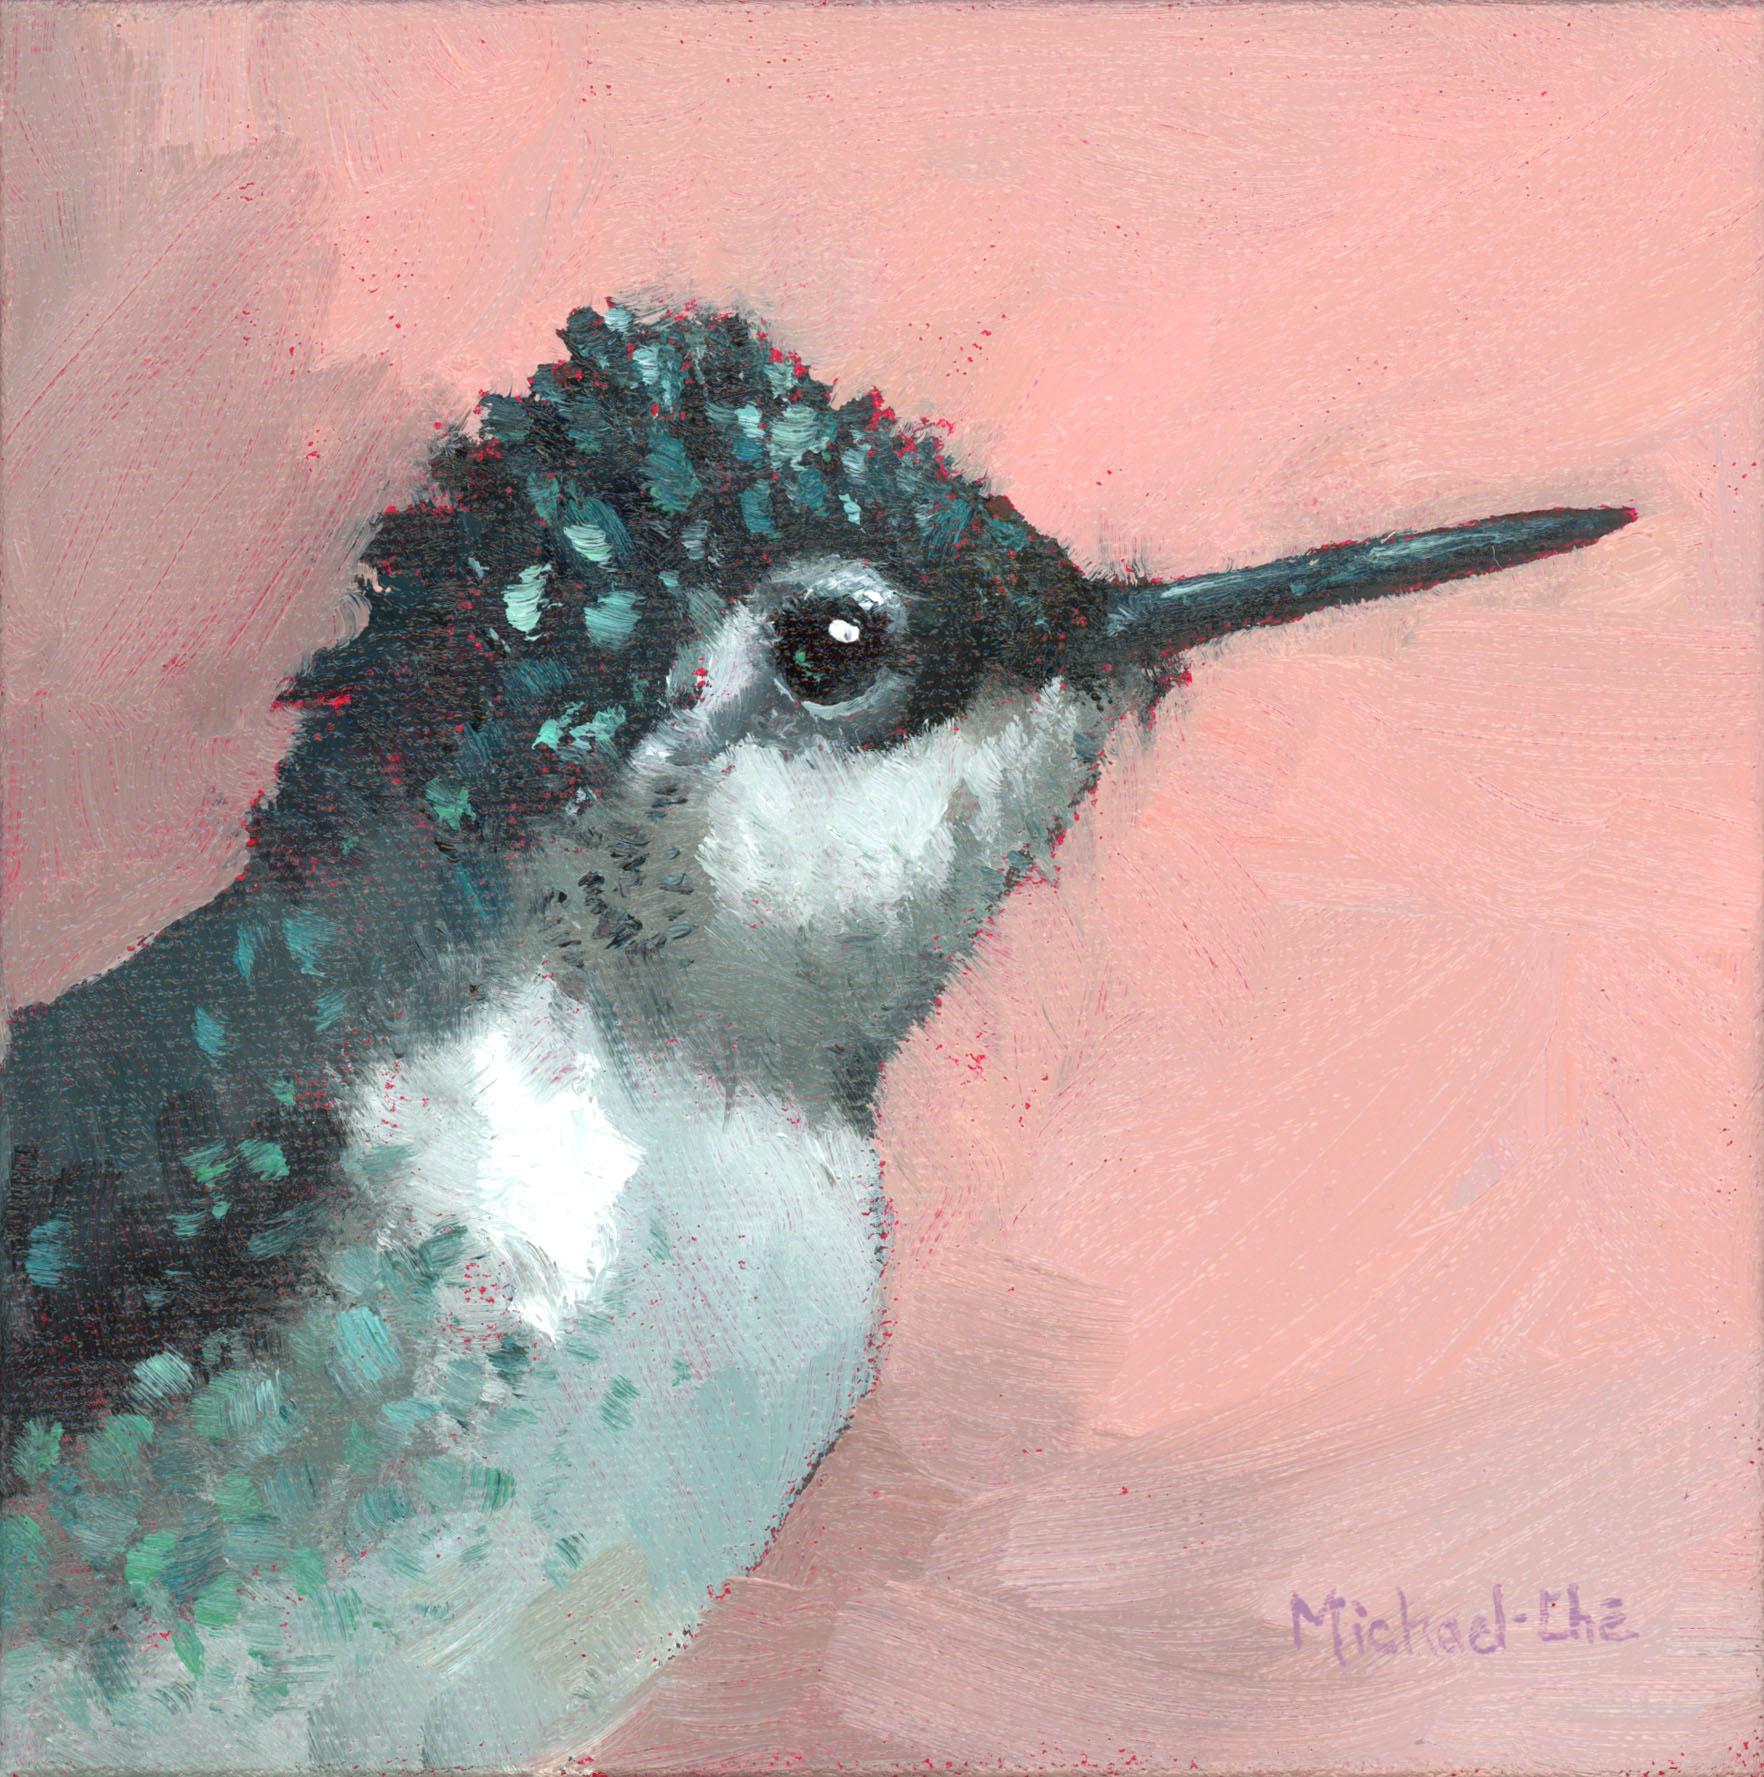 Michael-Che Swisher Animal Painting - "Little Treasure" Oil painting of a woodpecker over pink background